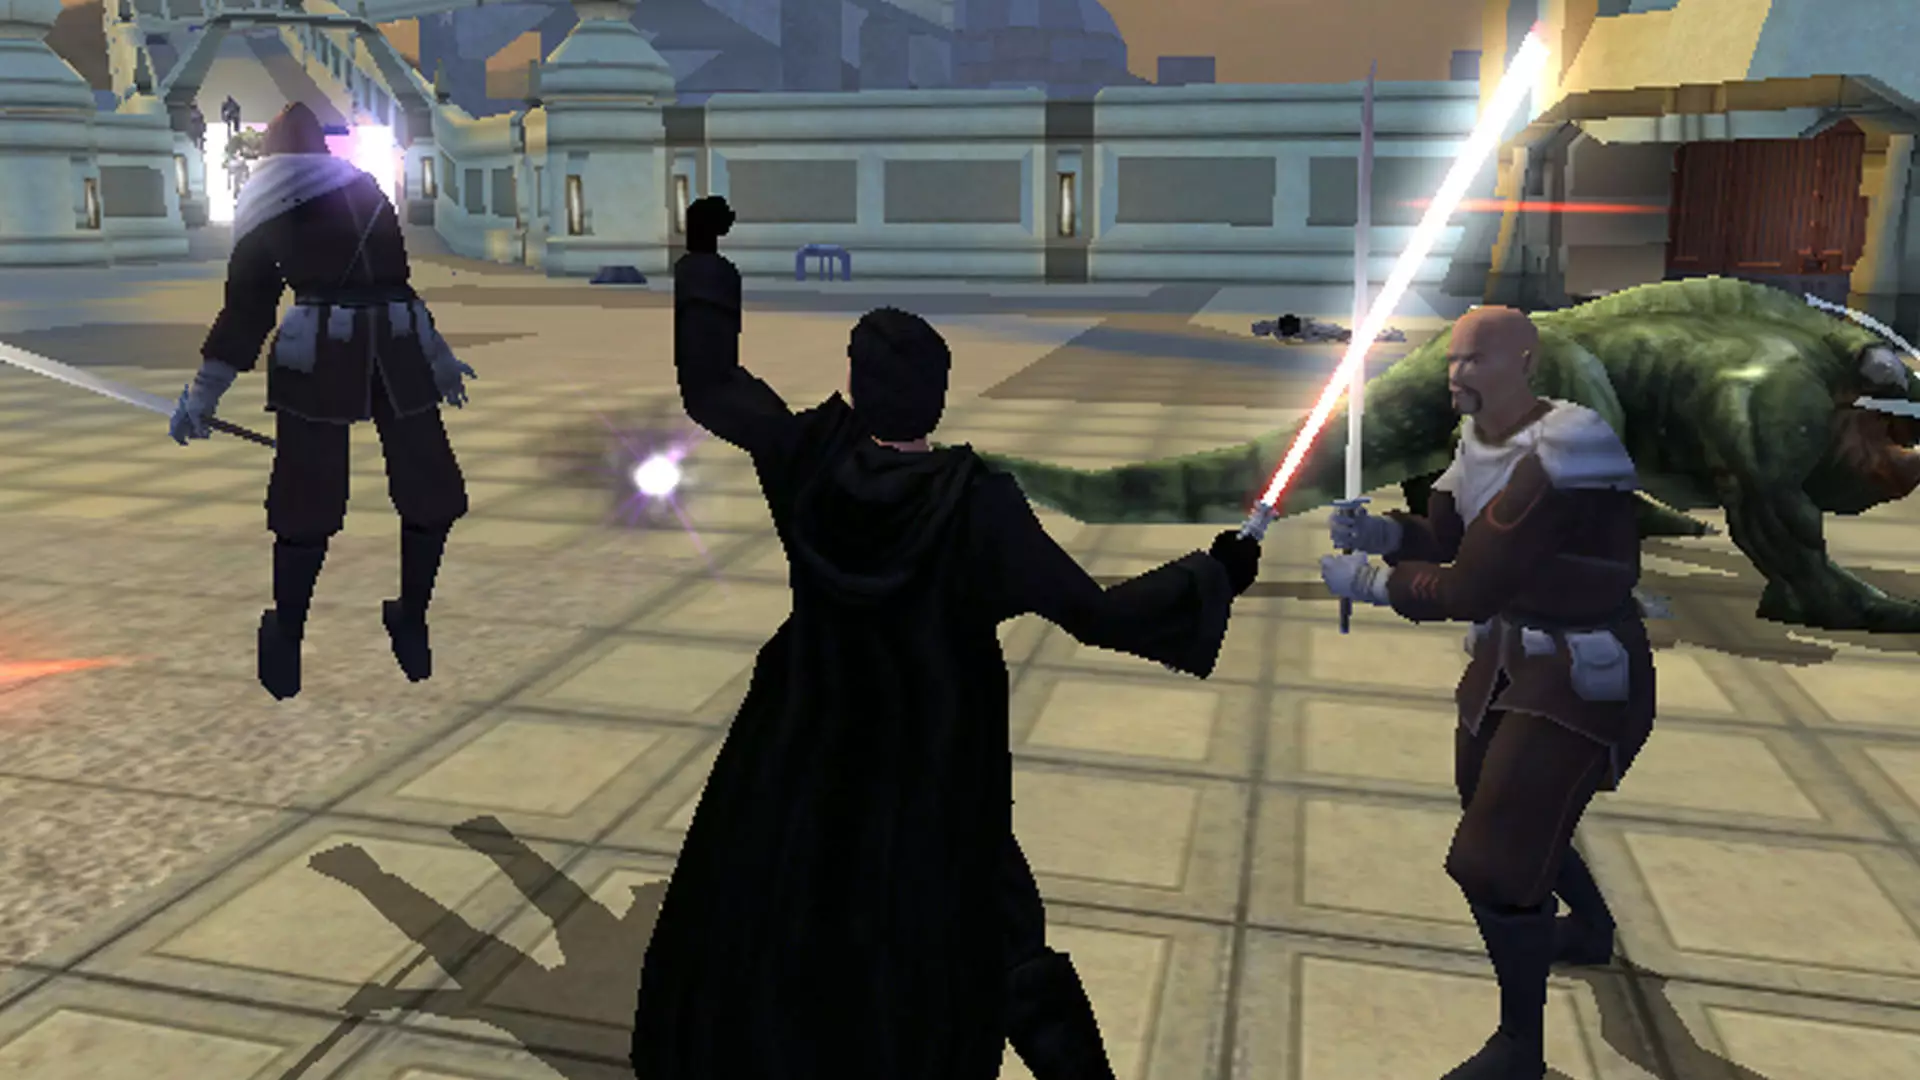 The fact that we could have had a Knights of the Old Republic 3 makes me want to force choke something